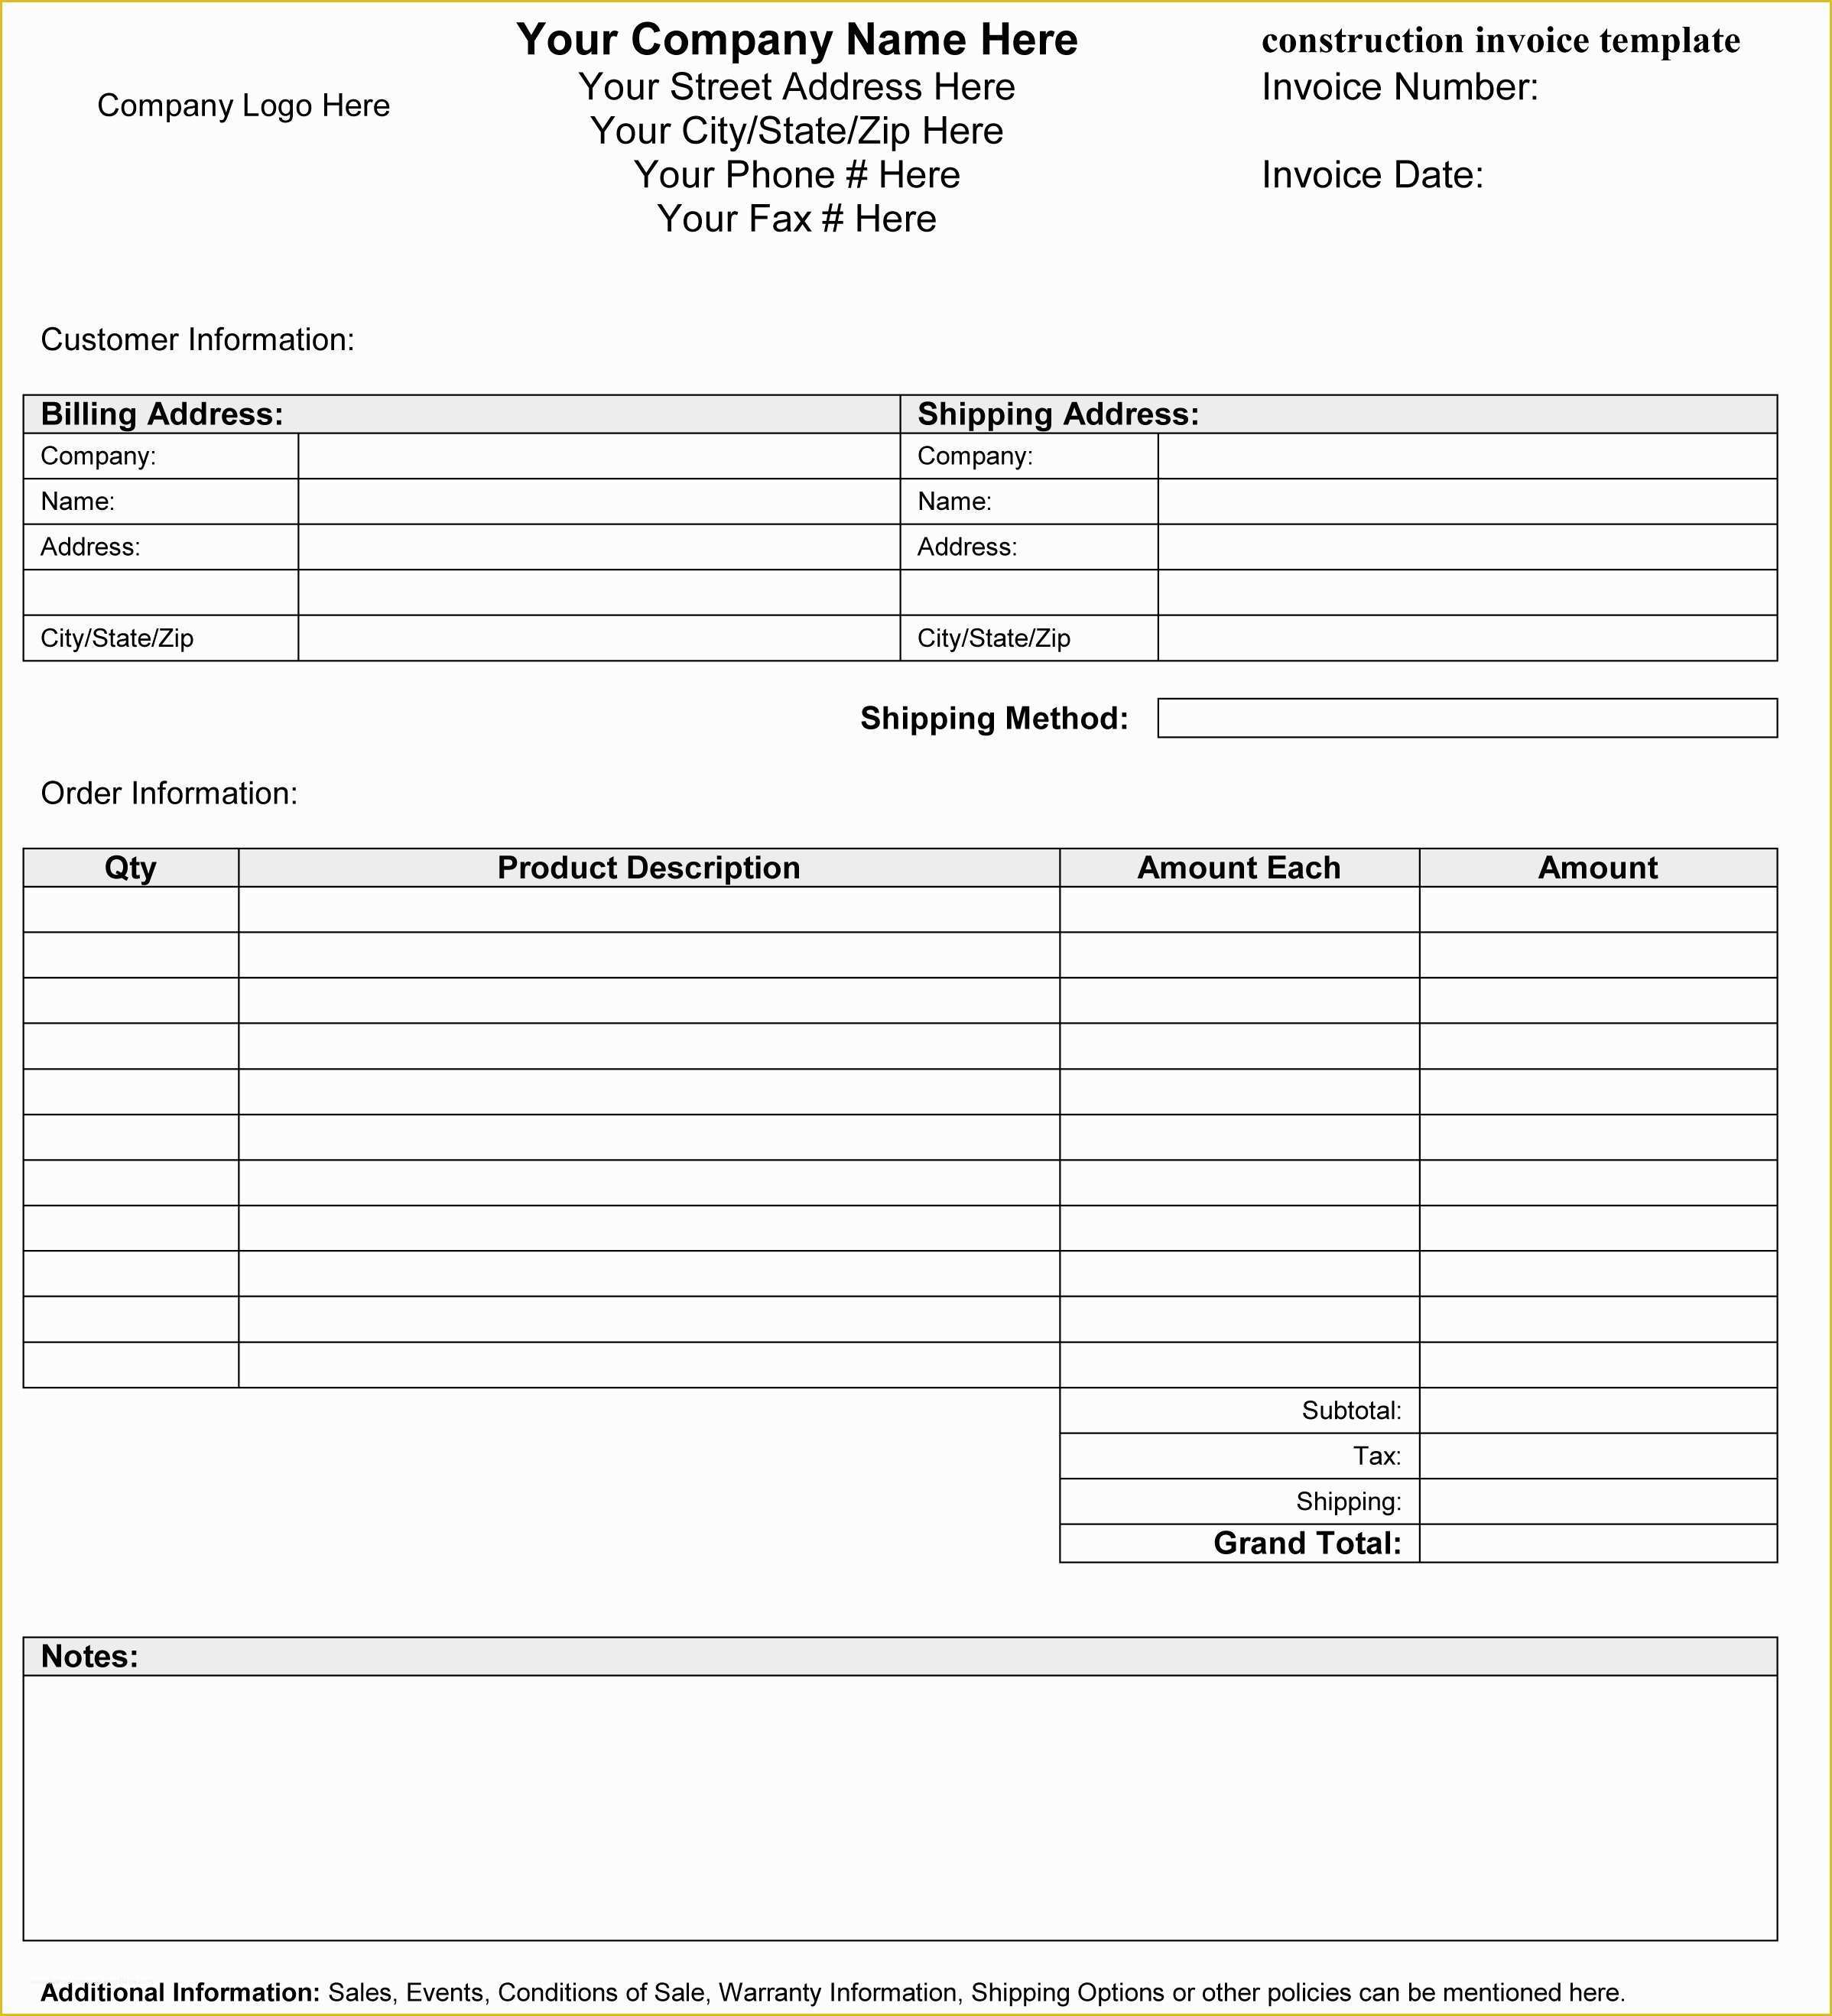 Free Printable Invoice Templates Excel Of Construction Invoice Template